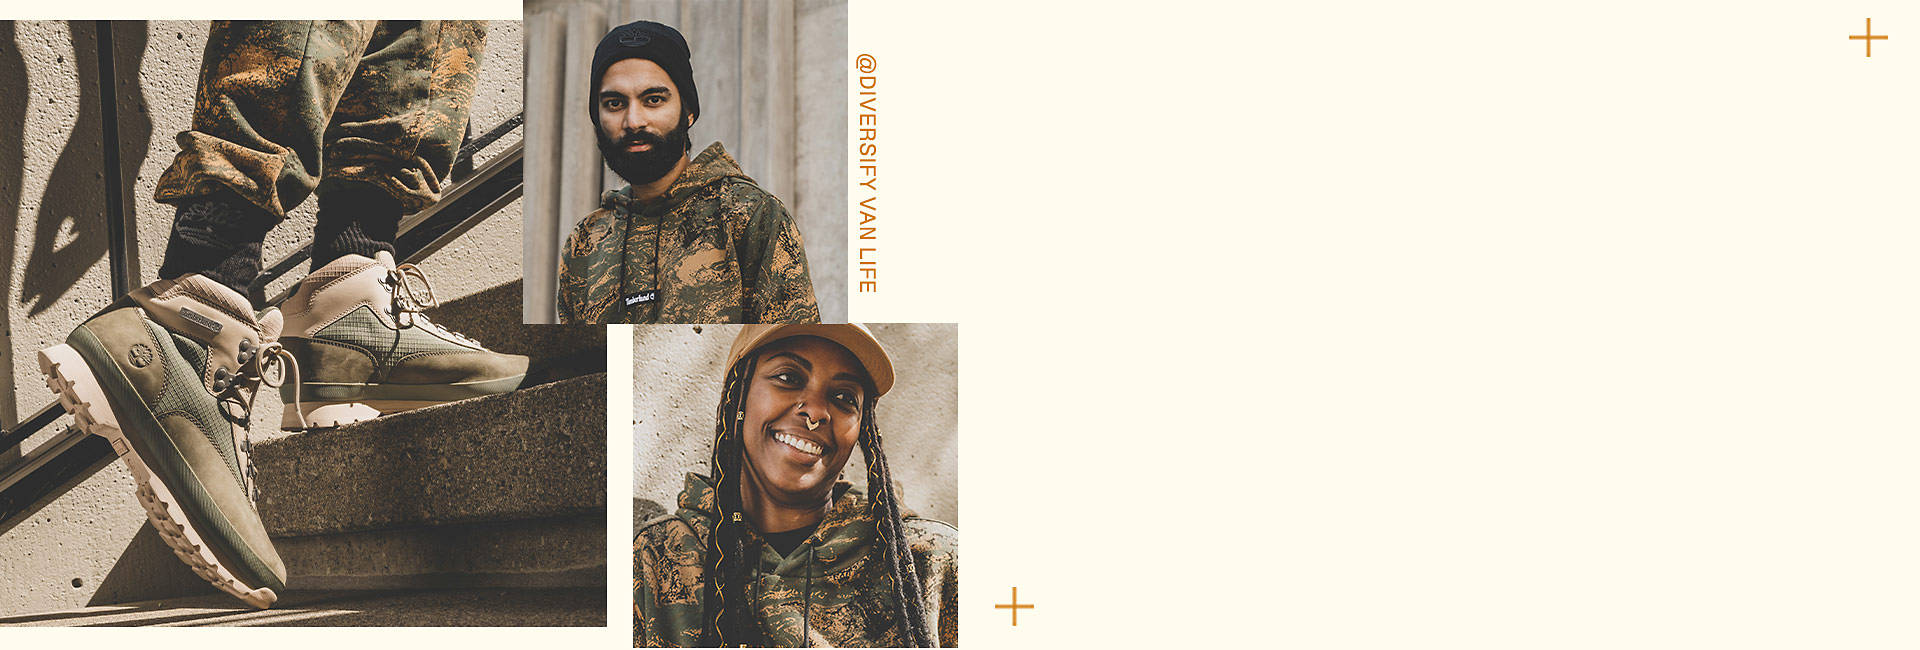 Image collage of a pair of olive green hikers going up a pair of concrete steps, plus a man and women in camo and Timberland hats.